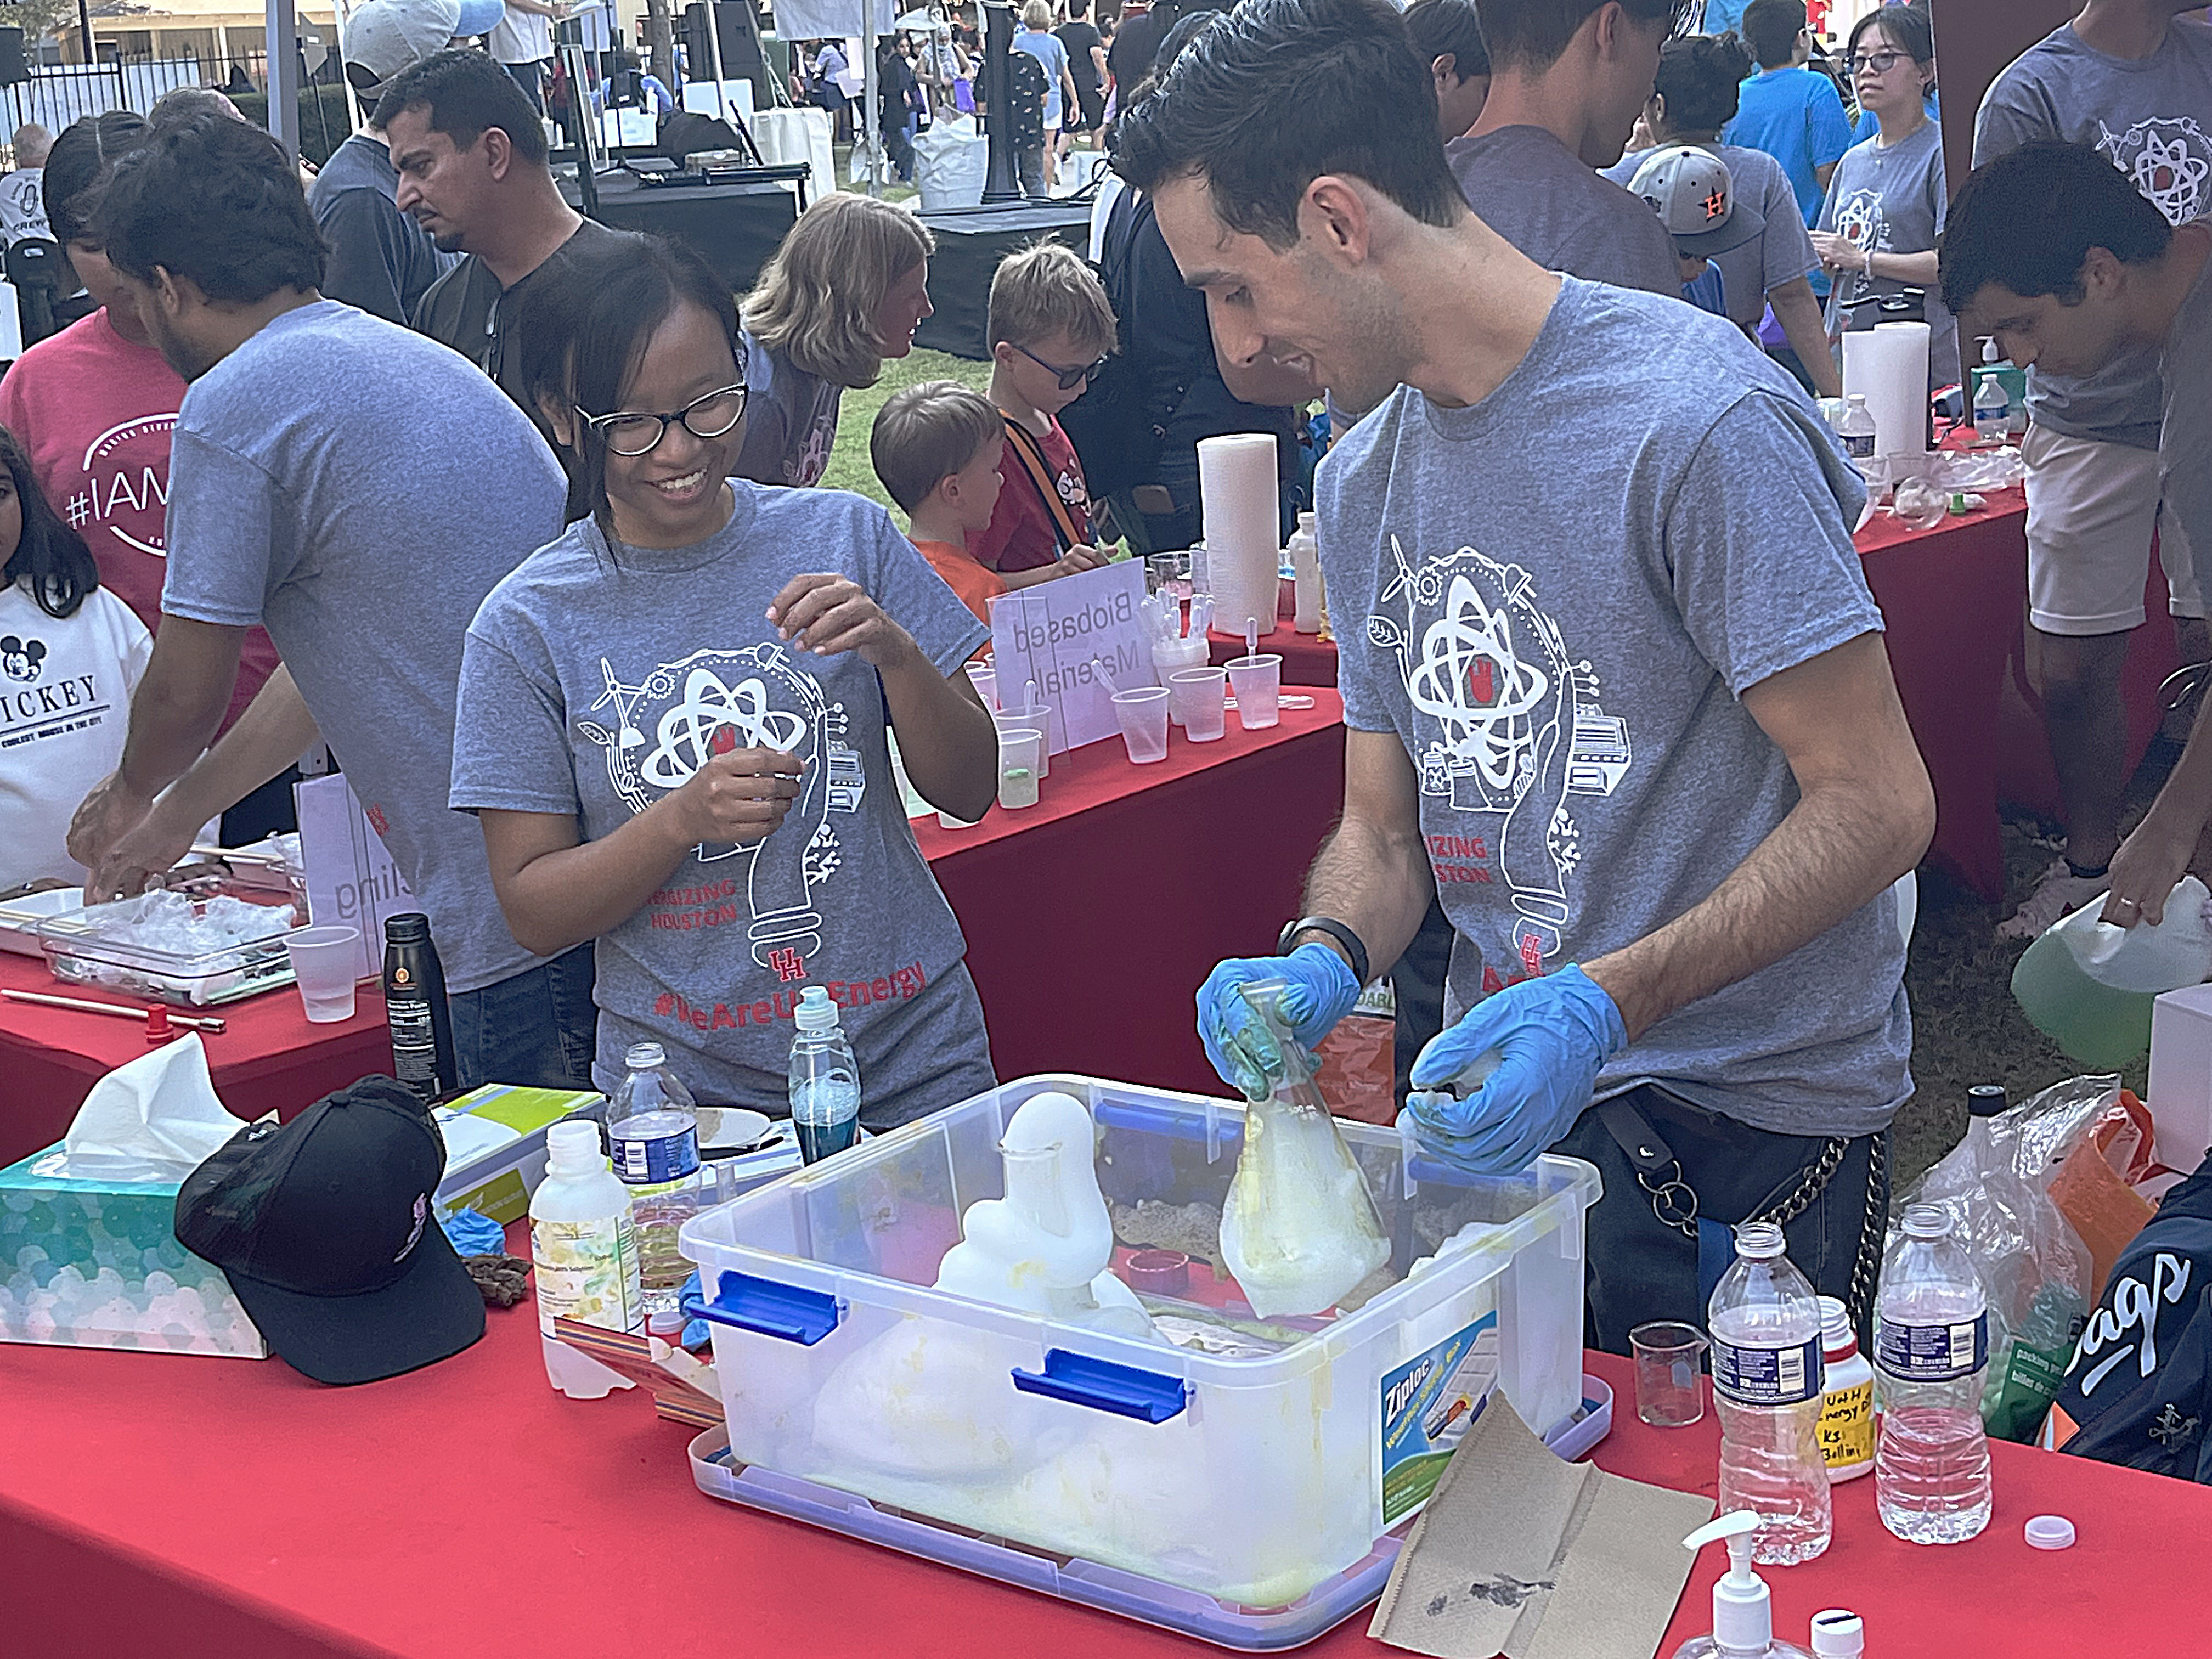 UH's Division of Energy and Innovation a Crowd Favorite as Energy Day Draws Thousands in 10th Year Anniversary